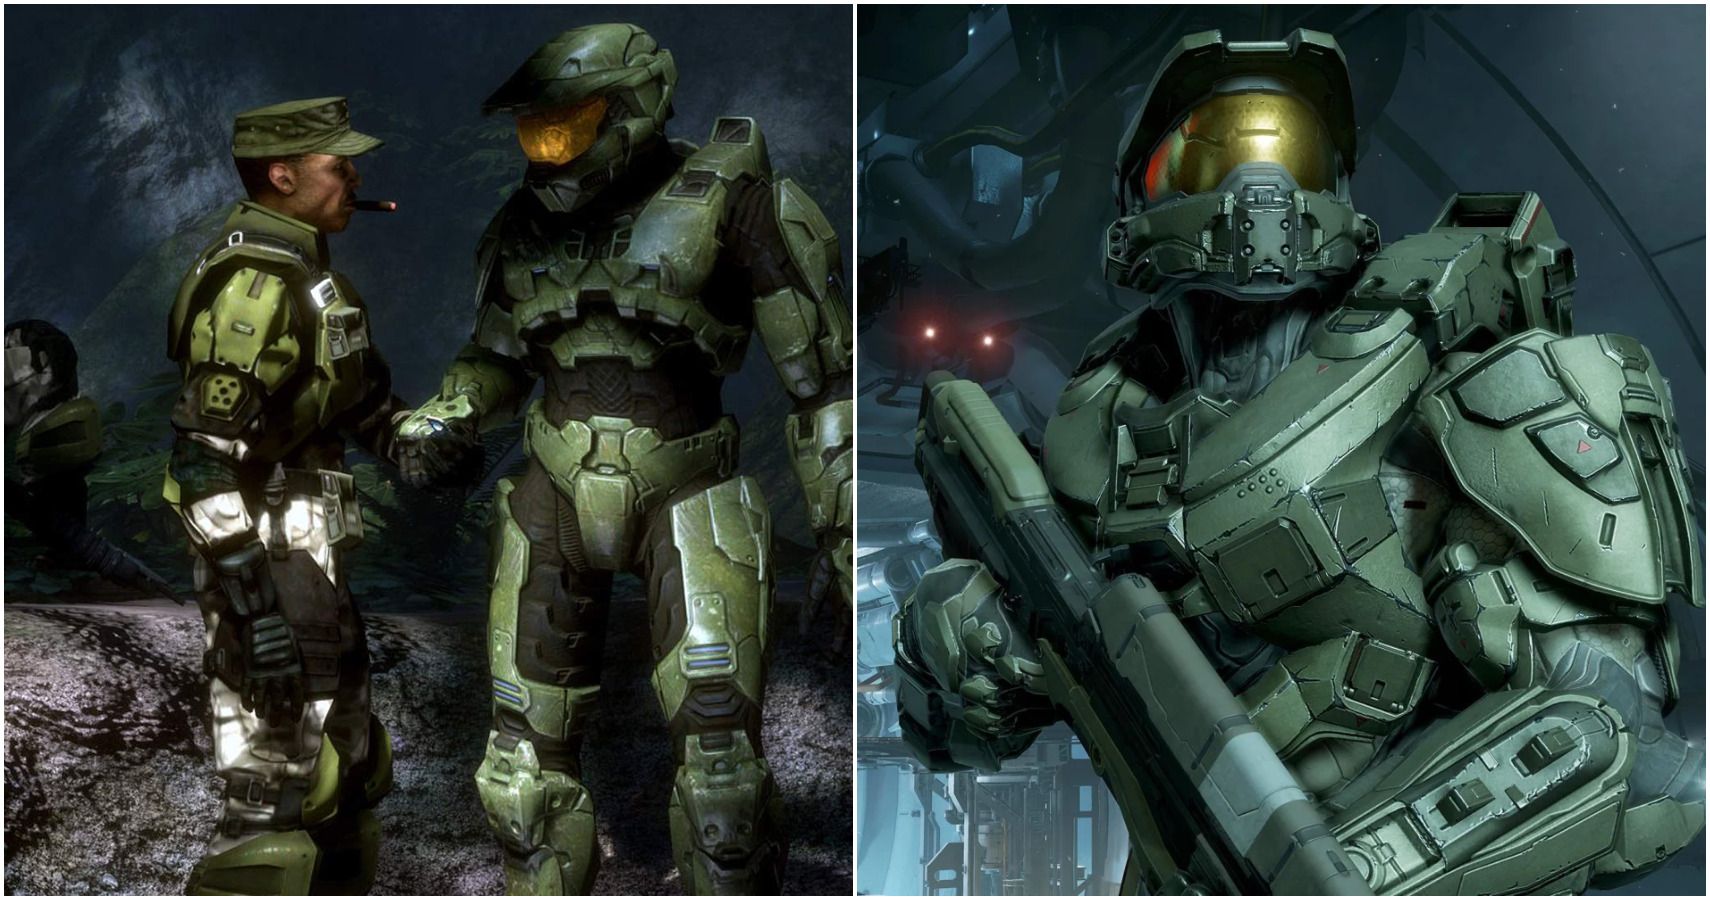 Halo: The Master Chief's 10 Biggest Weaknesses